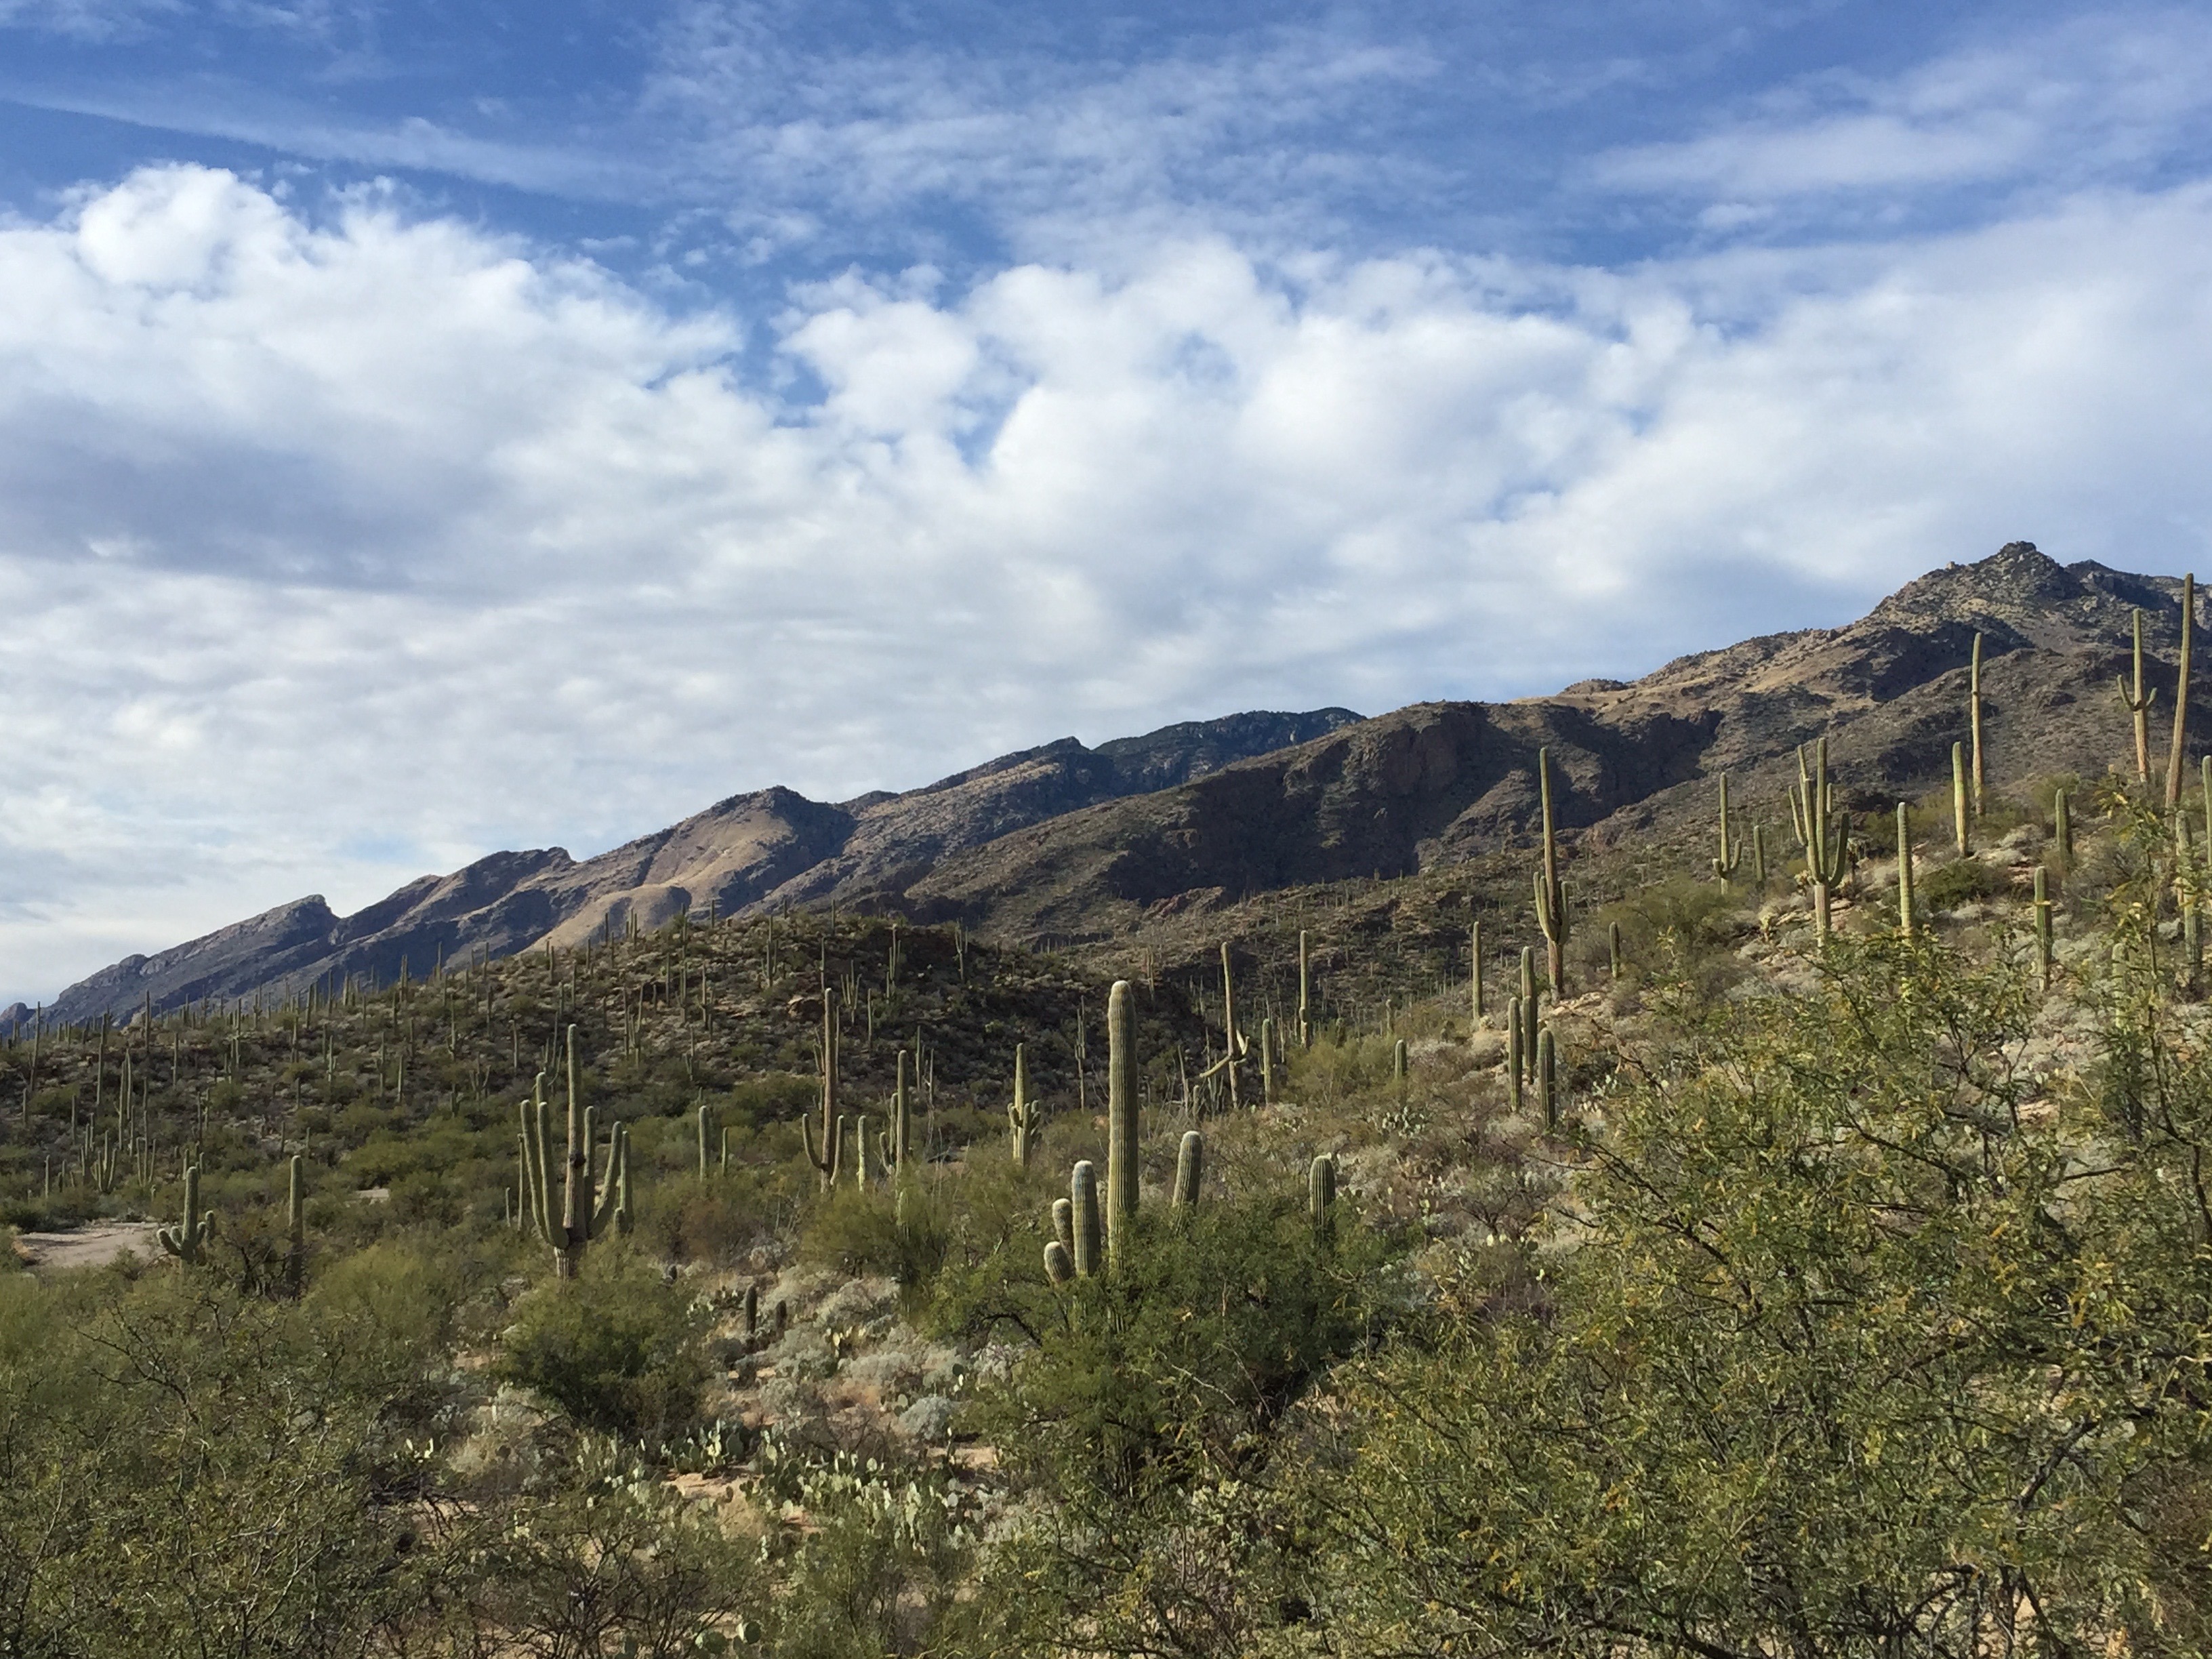 Saguaro National Park midday with some cloud coverage